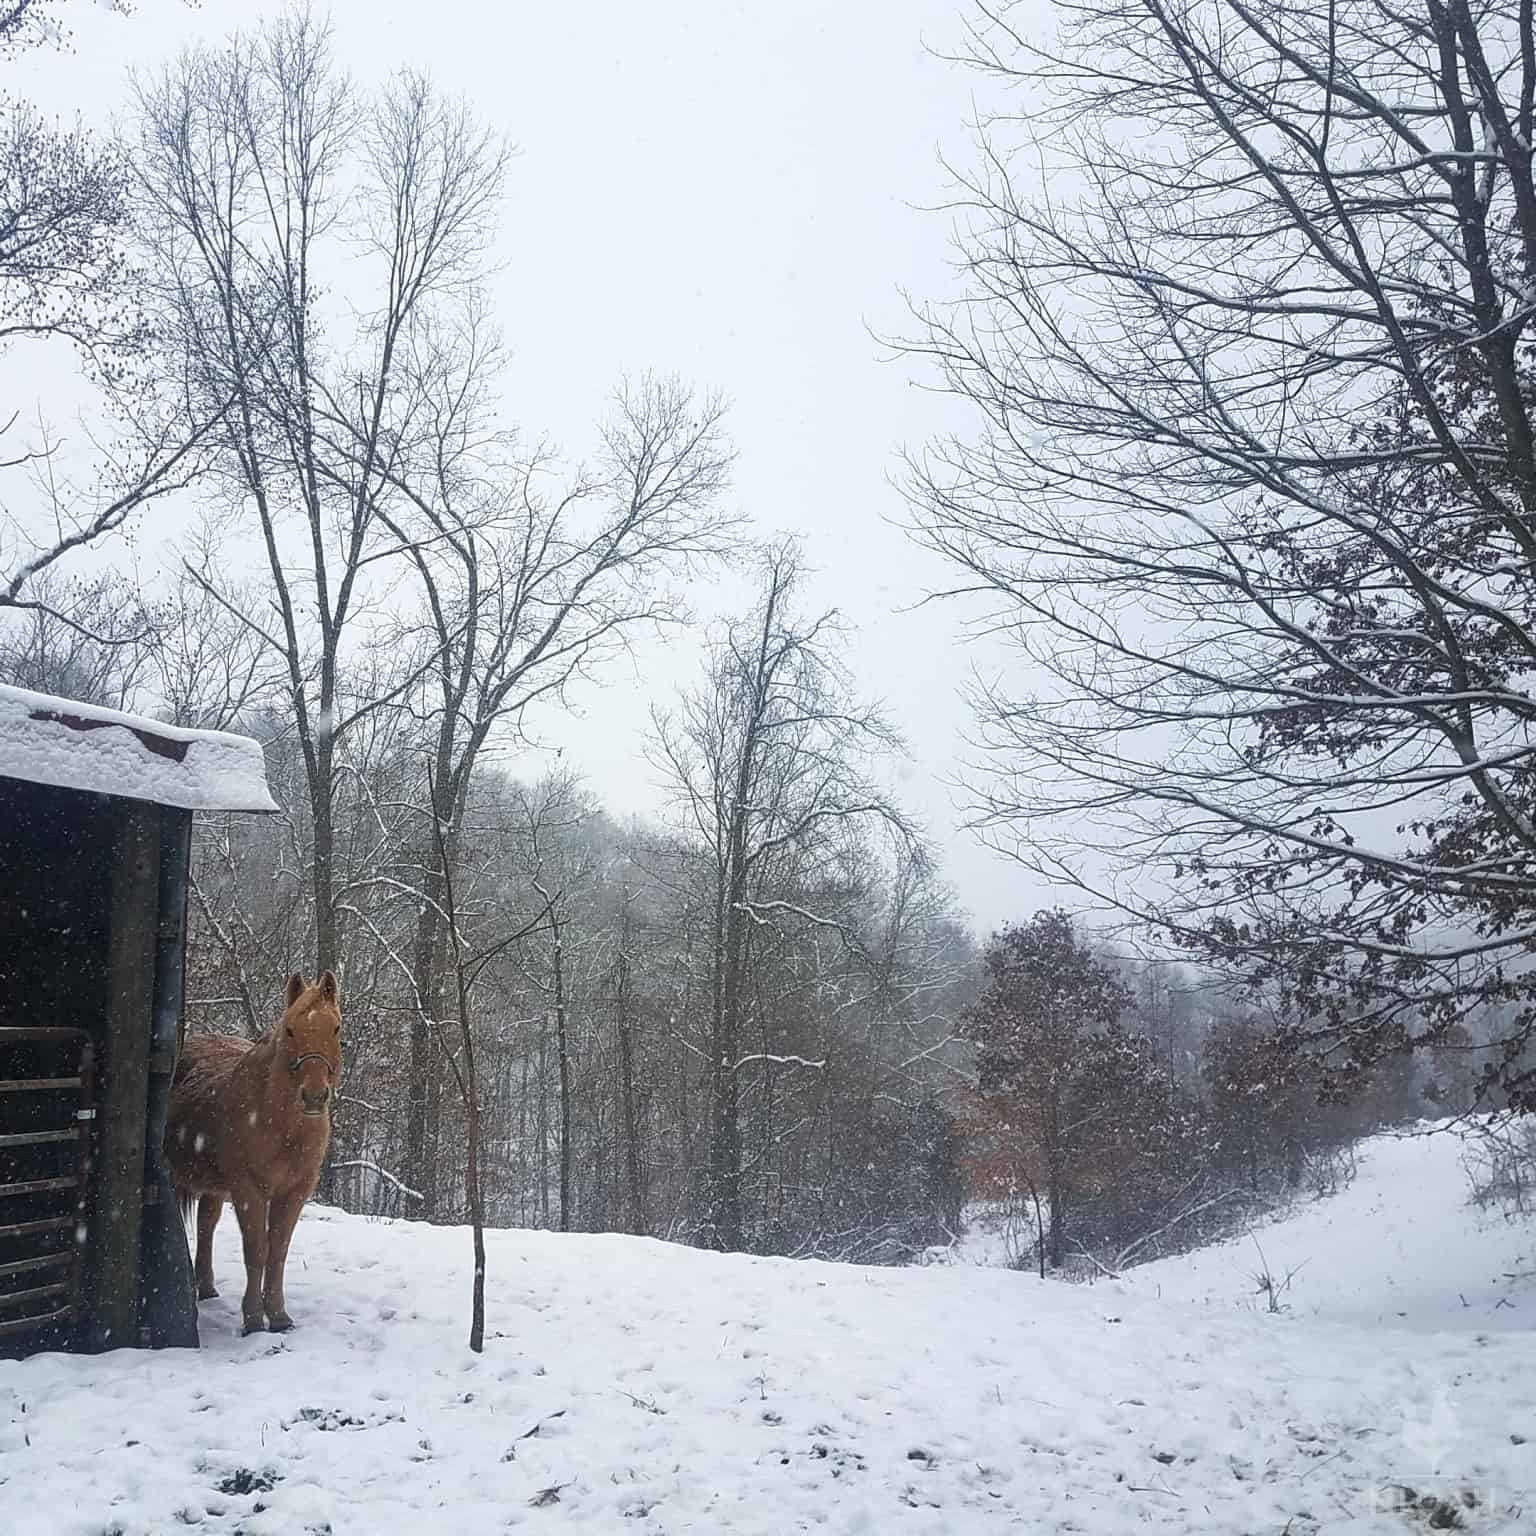 horse in snow by the barn